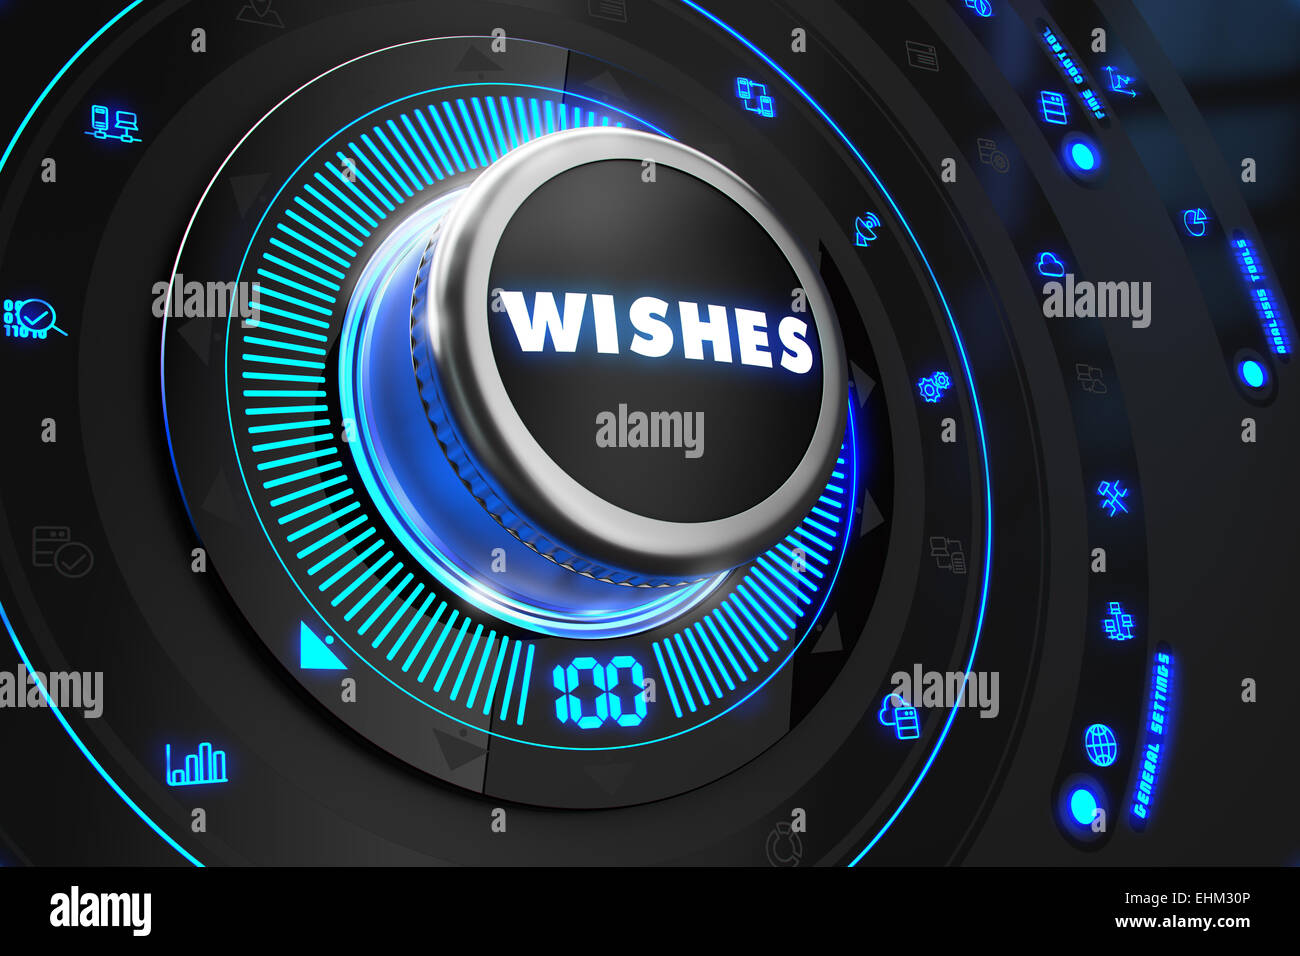 Wishes Button with Glowing Blue Lights. Stock Photo